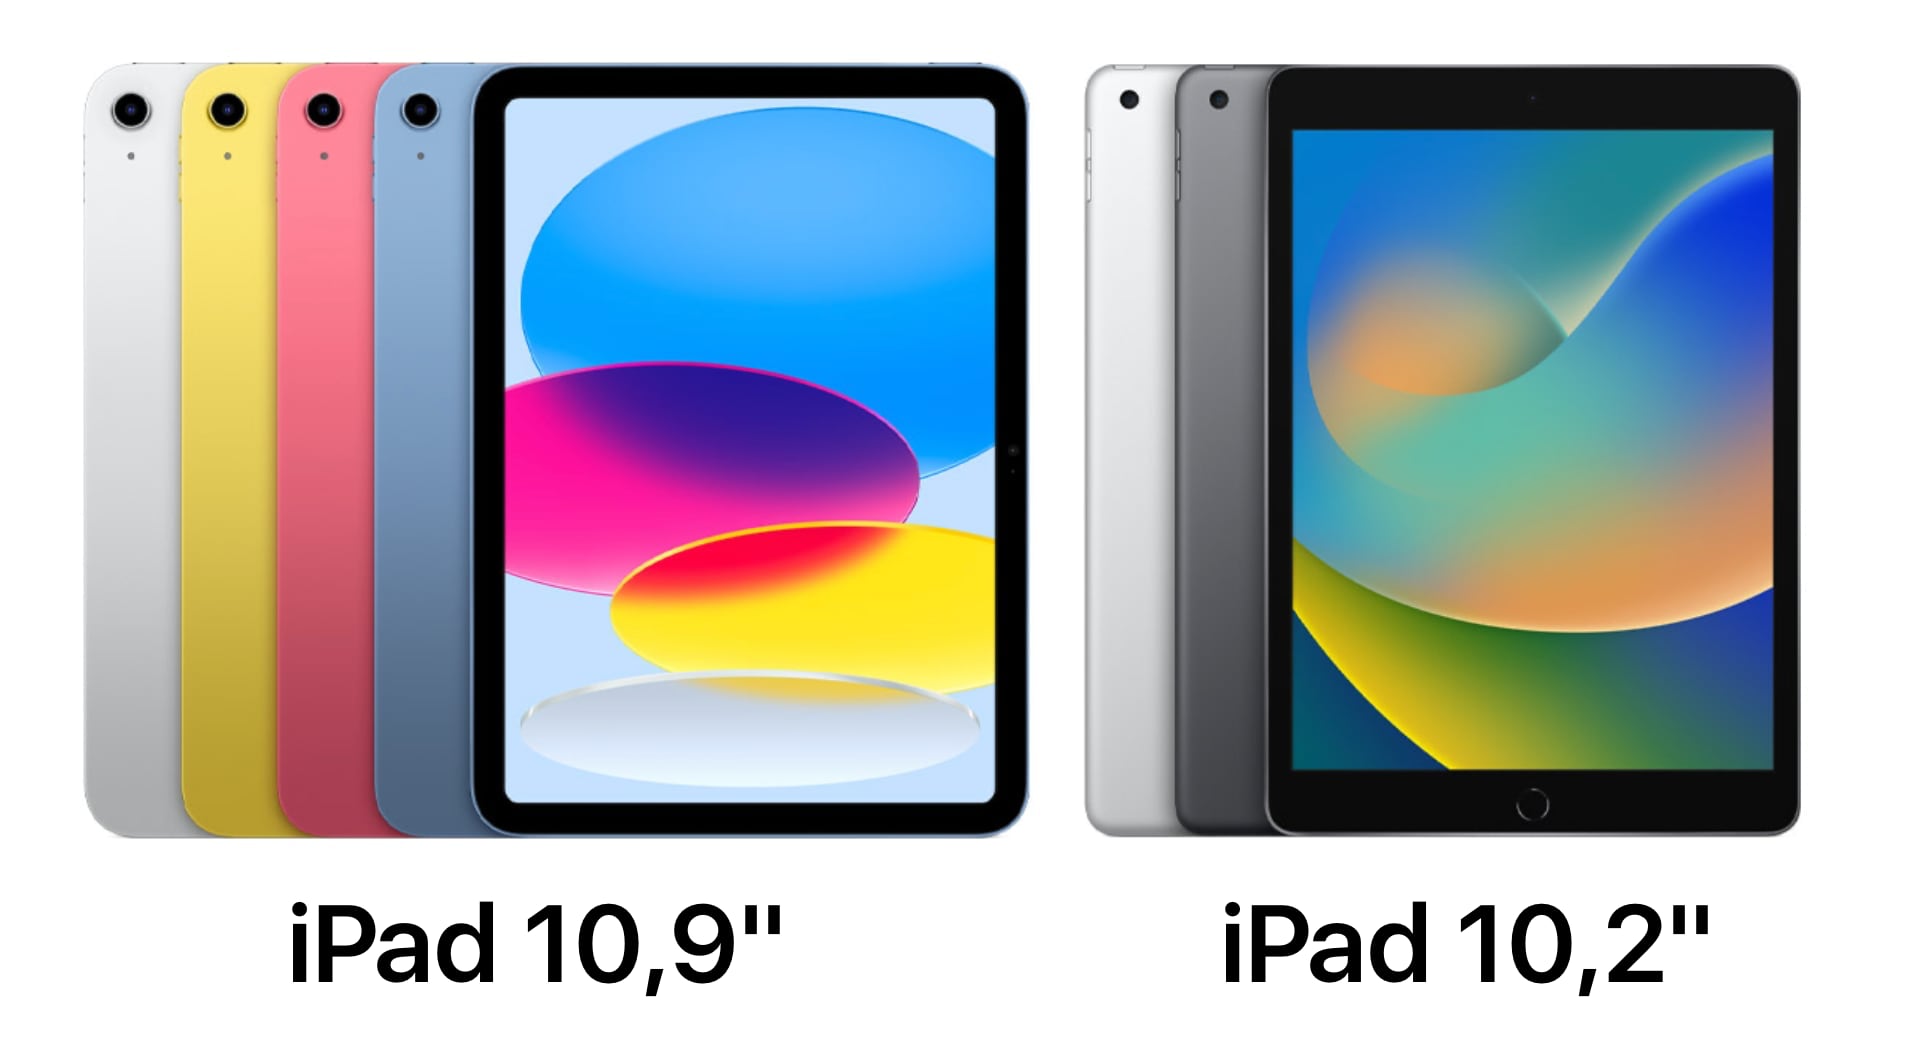 iPad 10.2 vs iPad 10.9 - What Are The Differences?